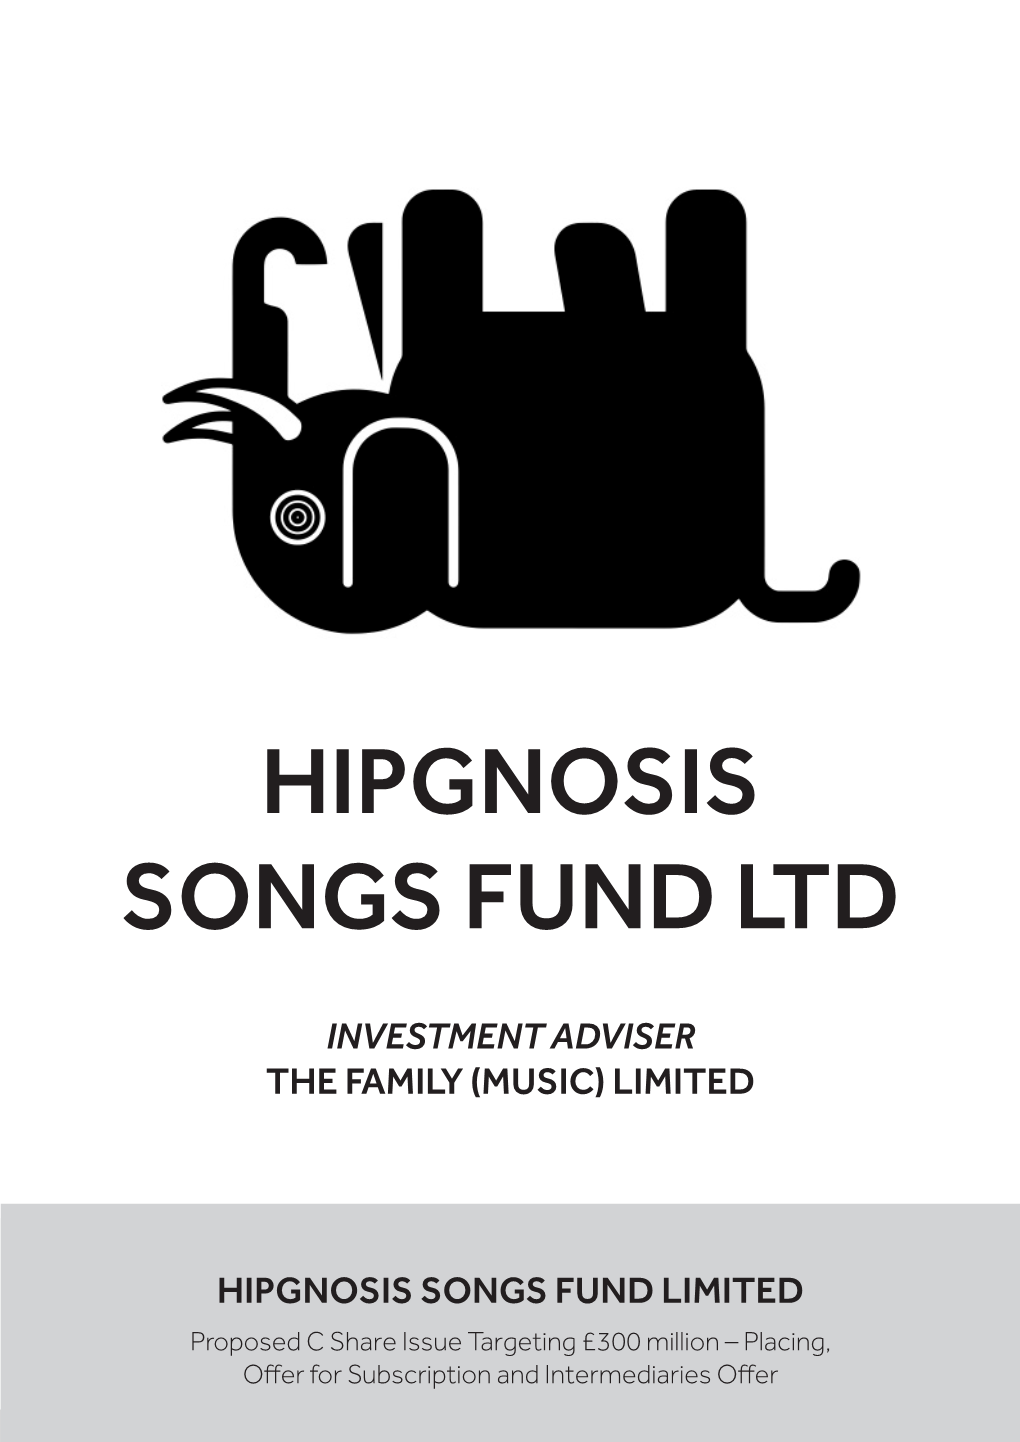 Investment Adviser the Family (Music) Limited